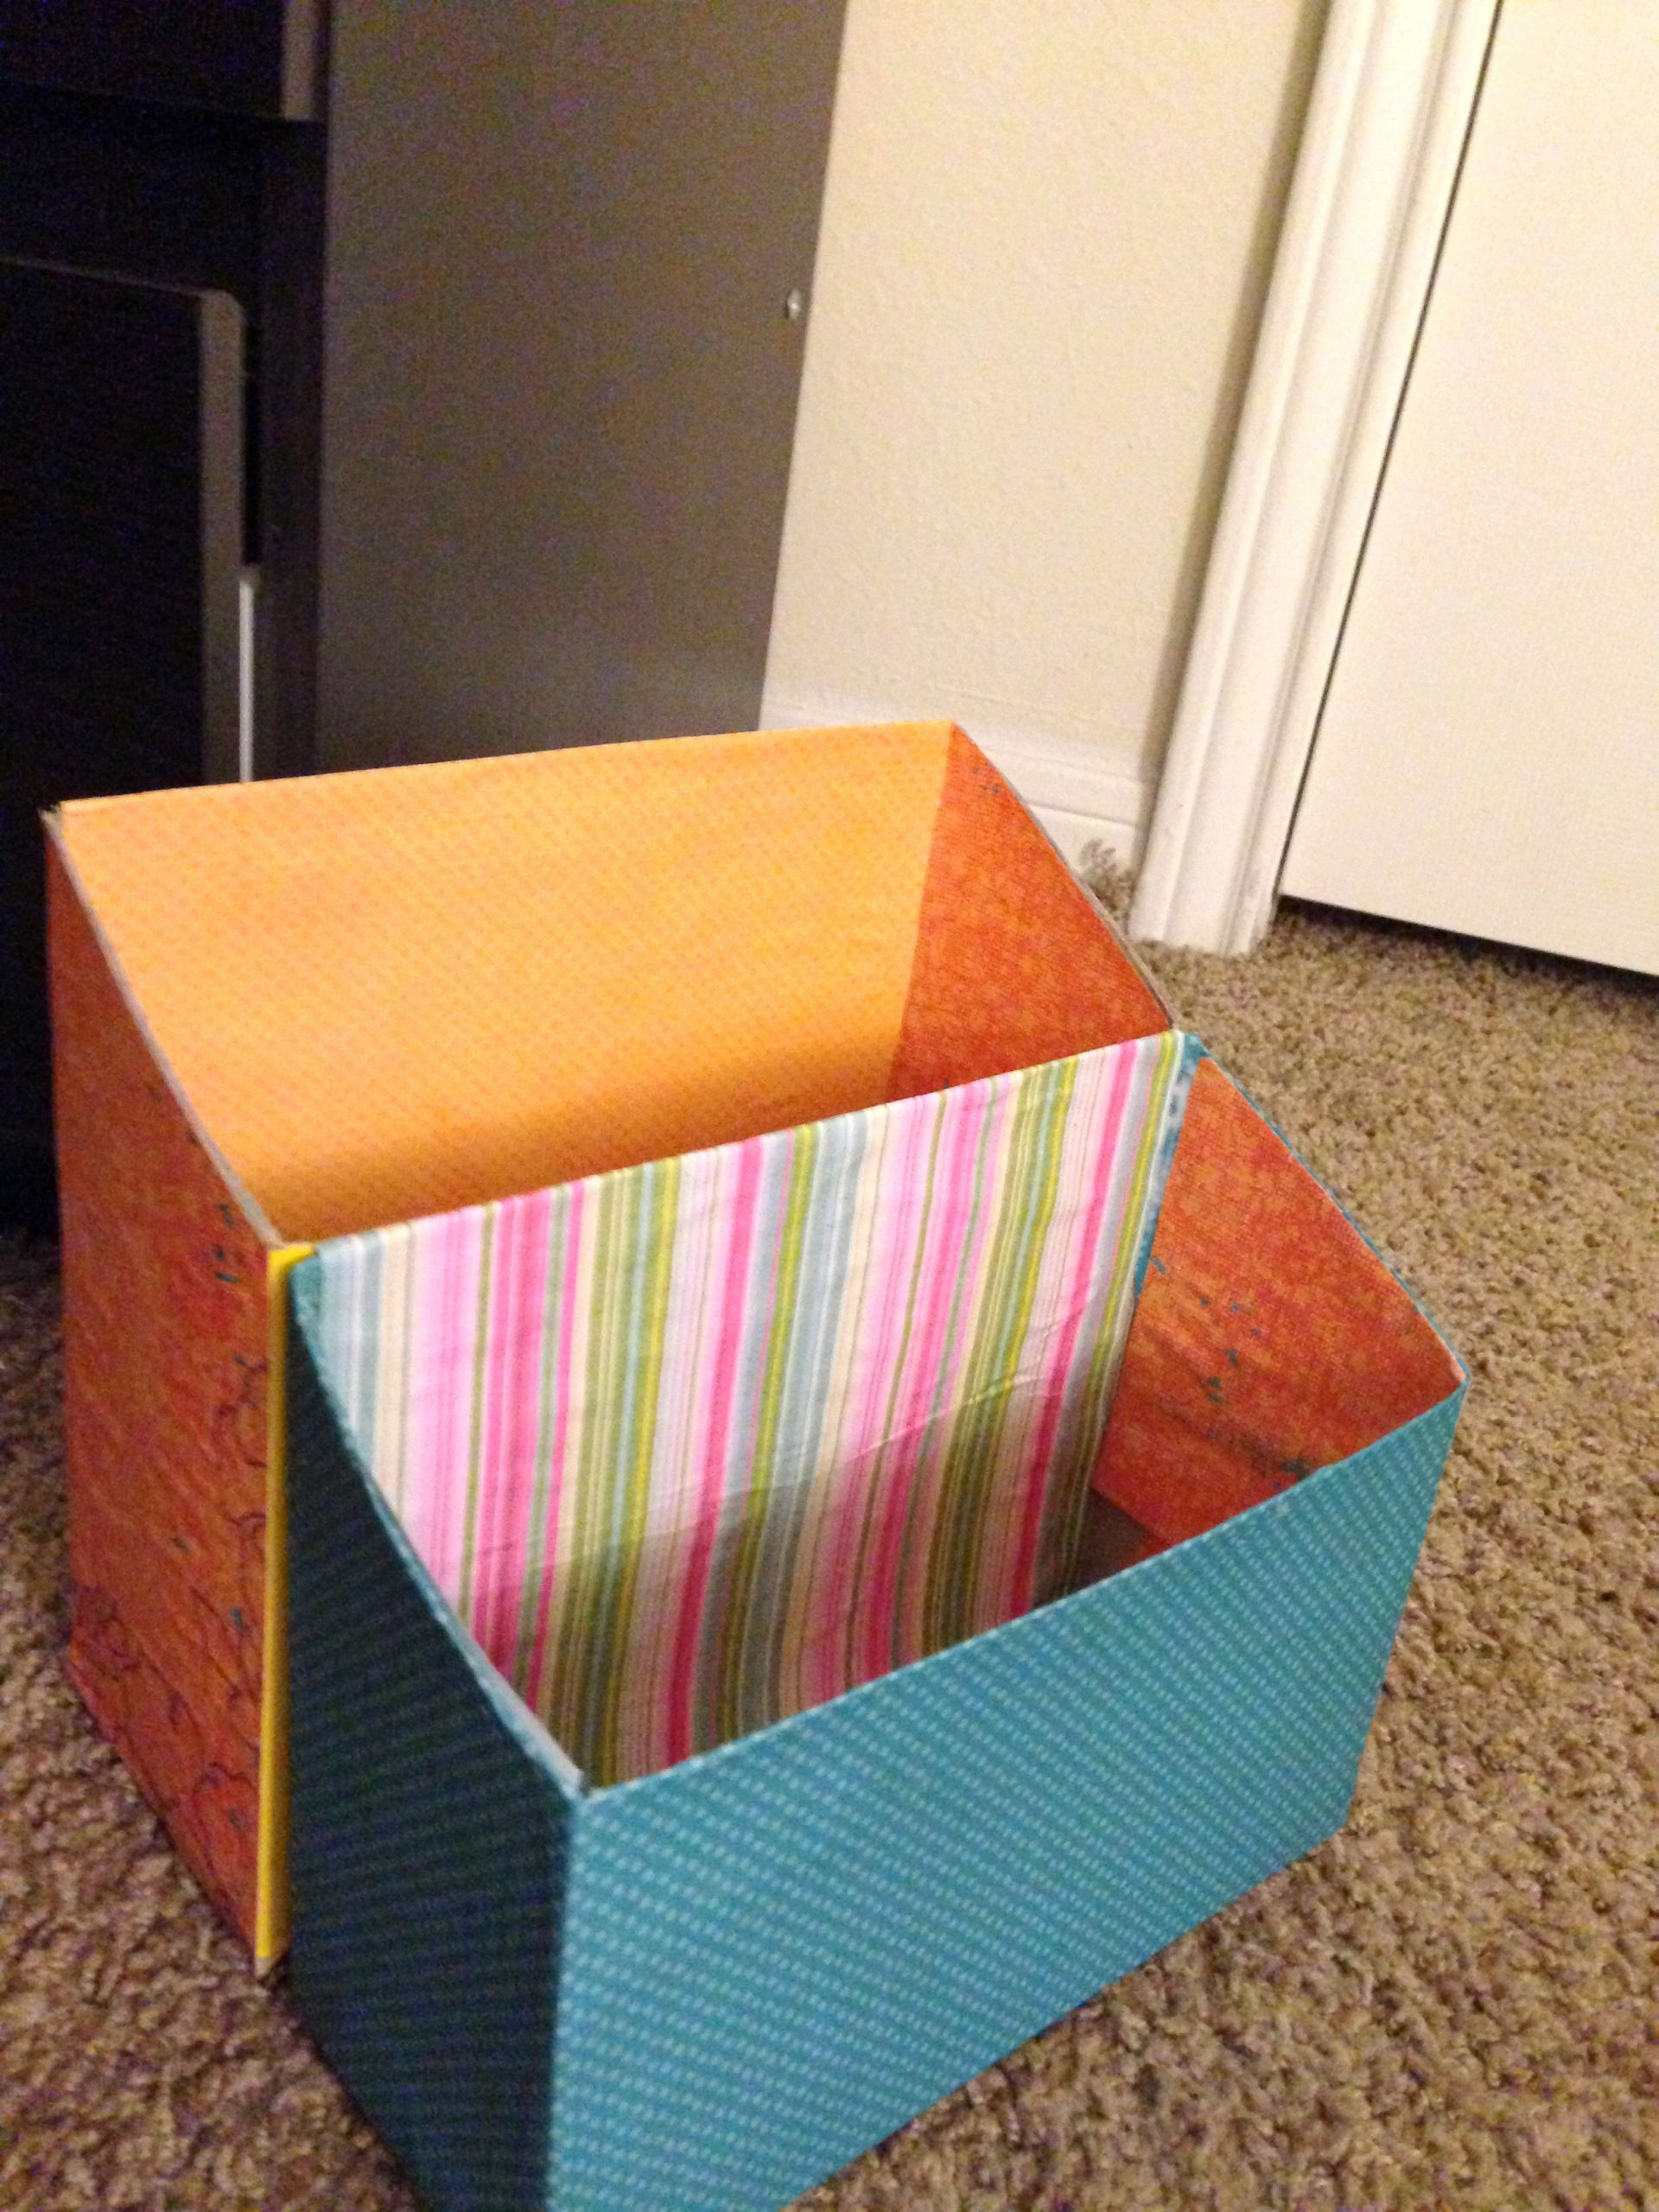 DIY Mail Organizer
 DIY mail organizer from cereal box